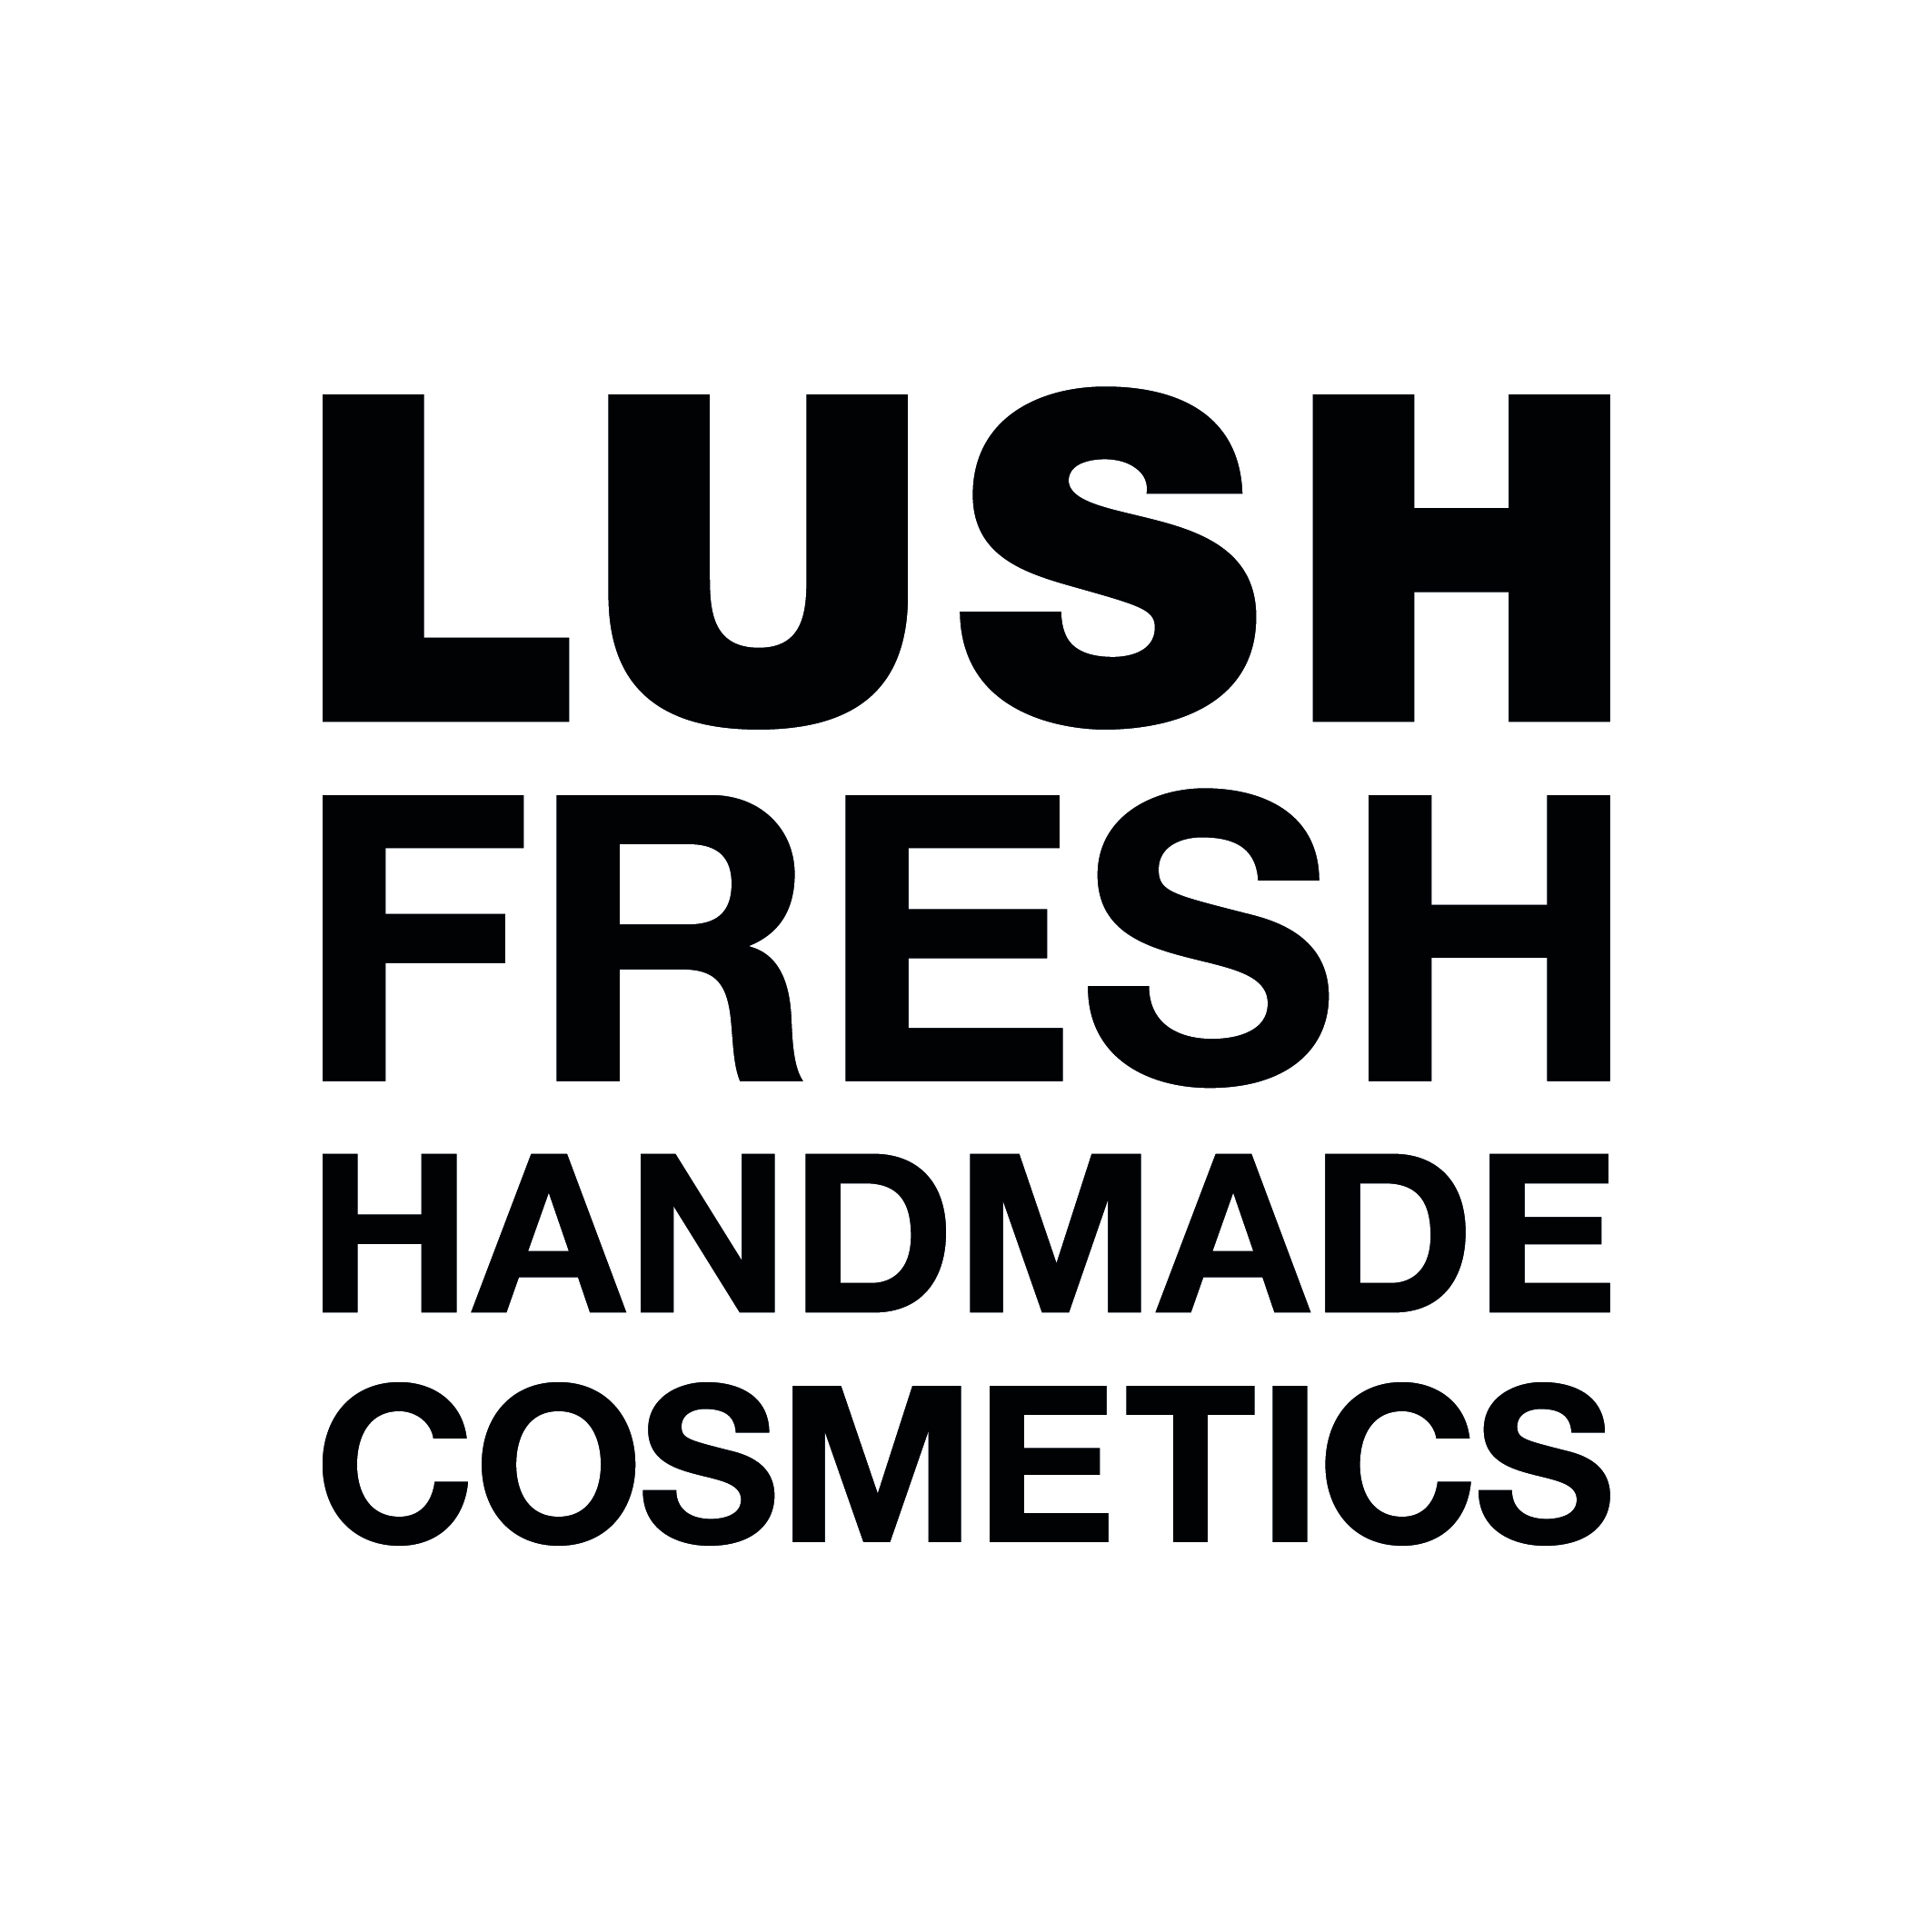 Our Giving - We are Lush